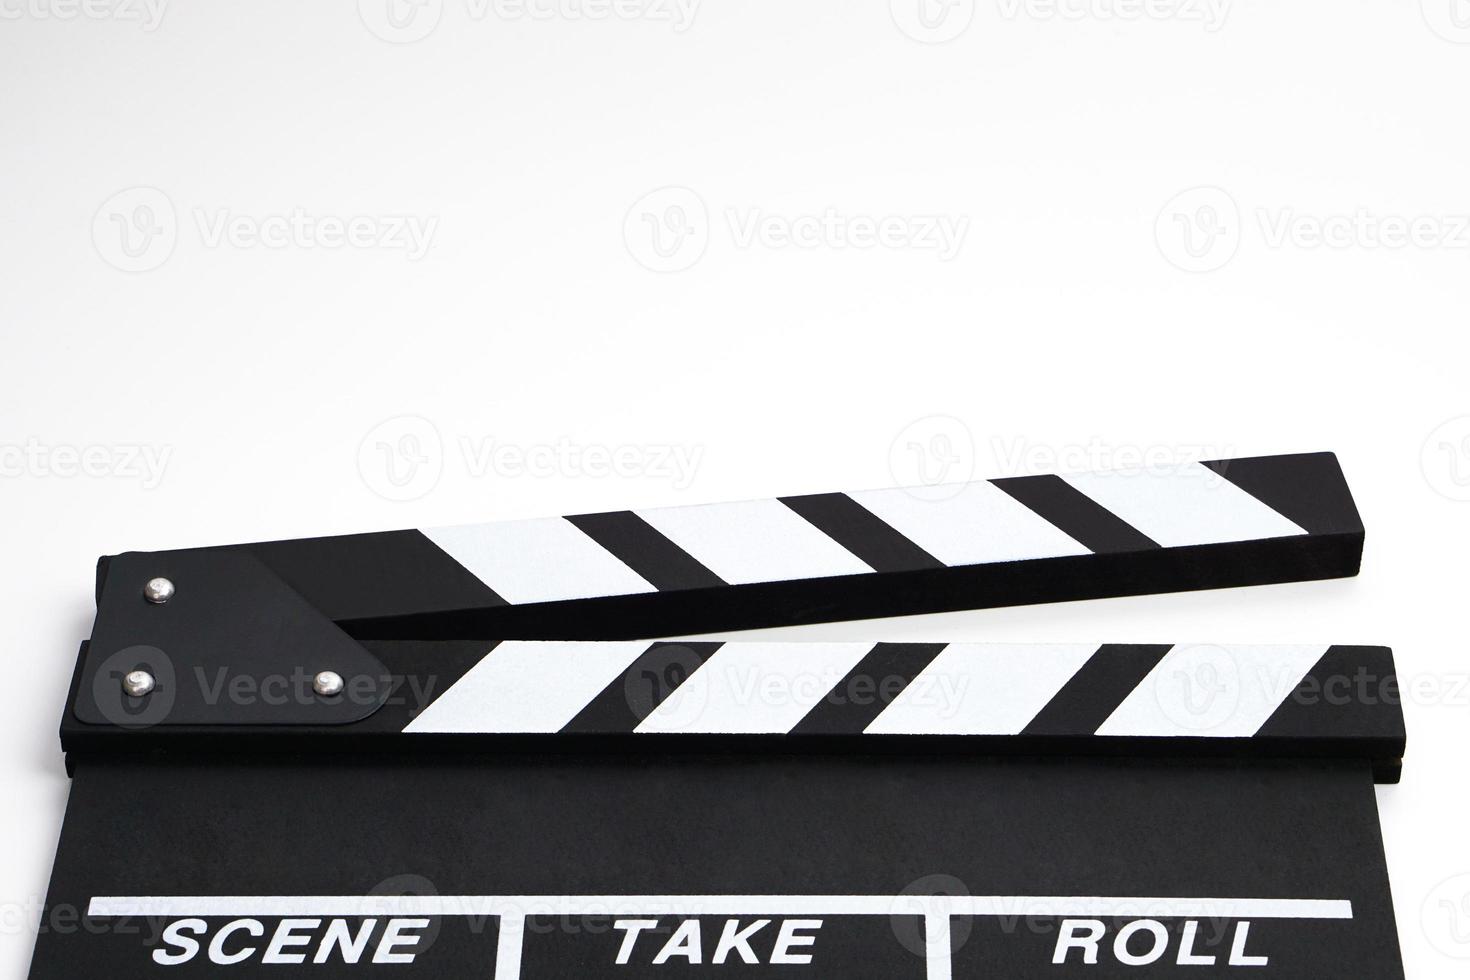 Clapperboard or movie slate black color on white background. Cinema industry, video production and film concept. photo